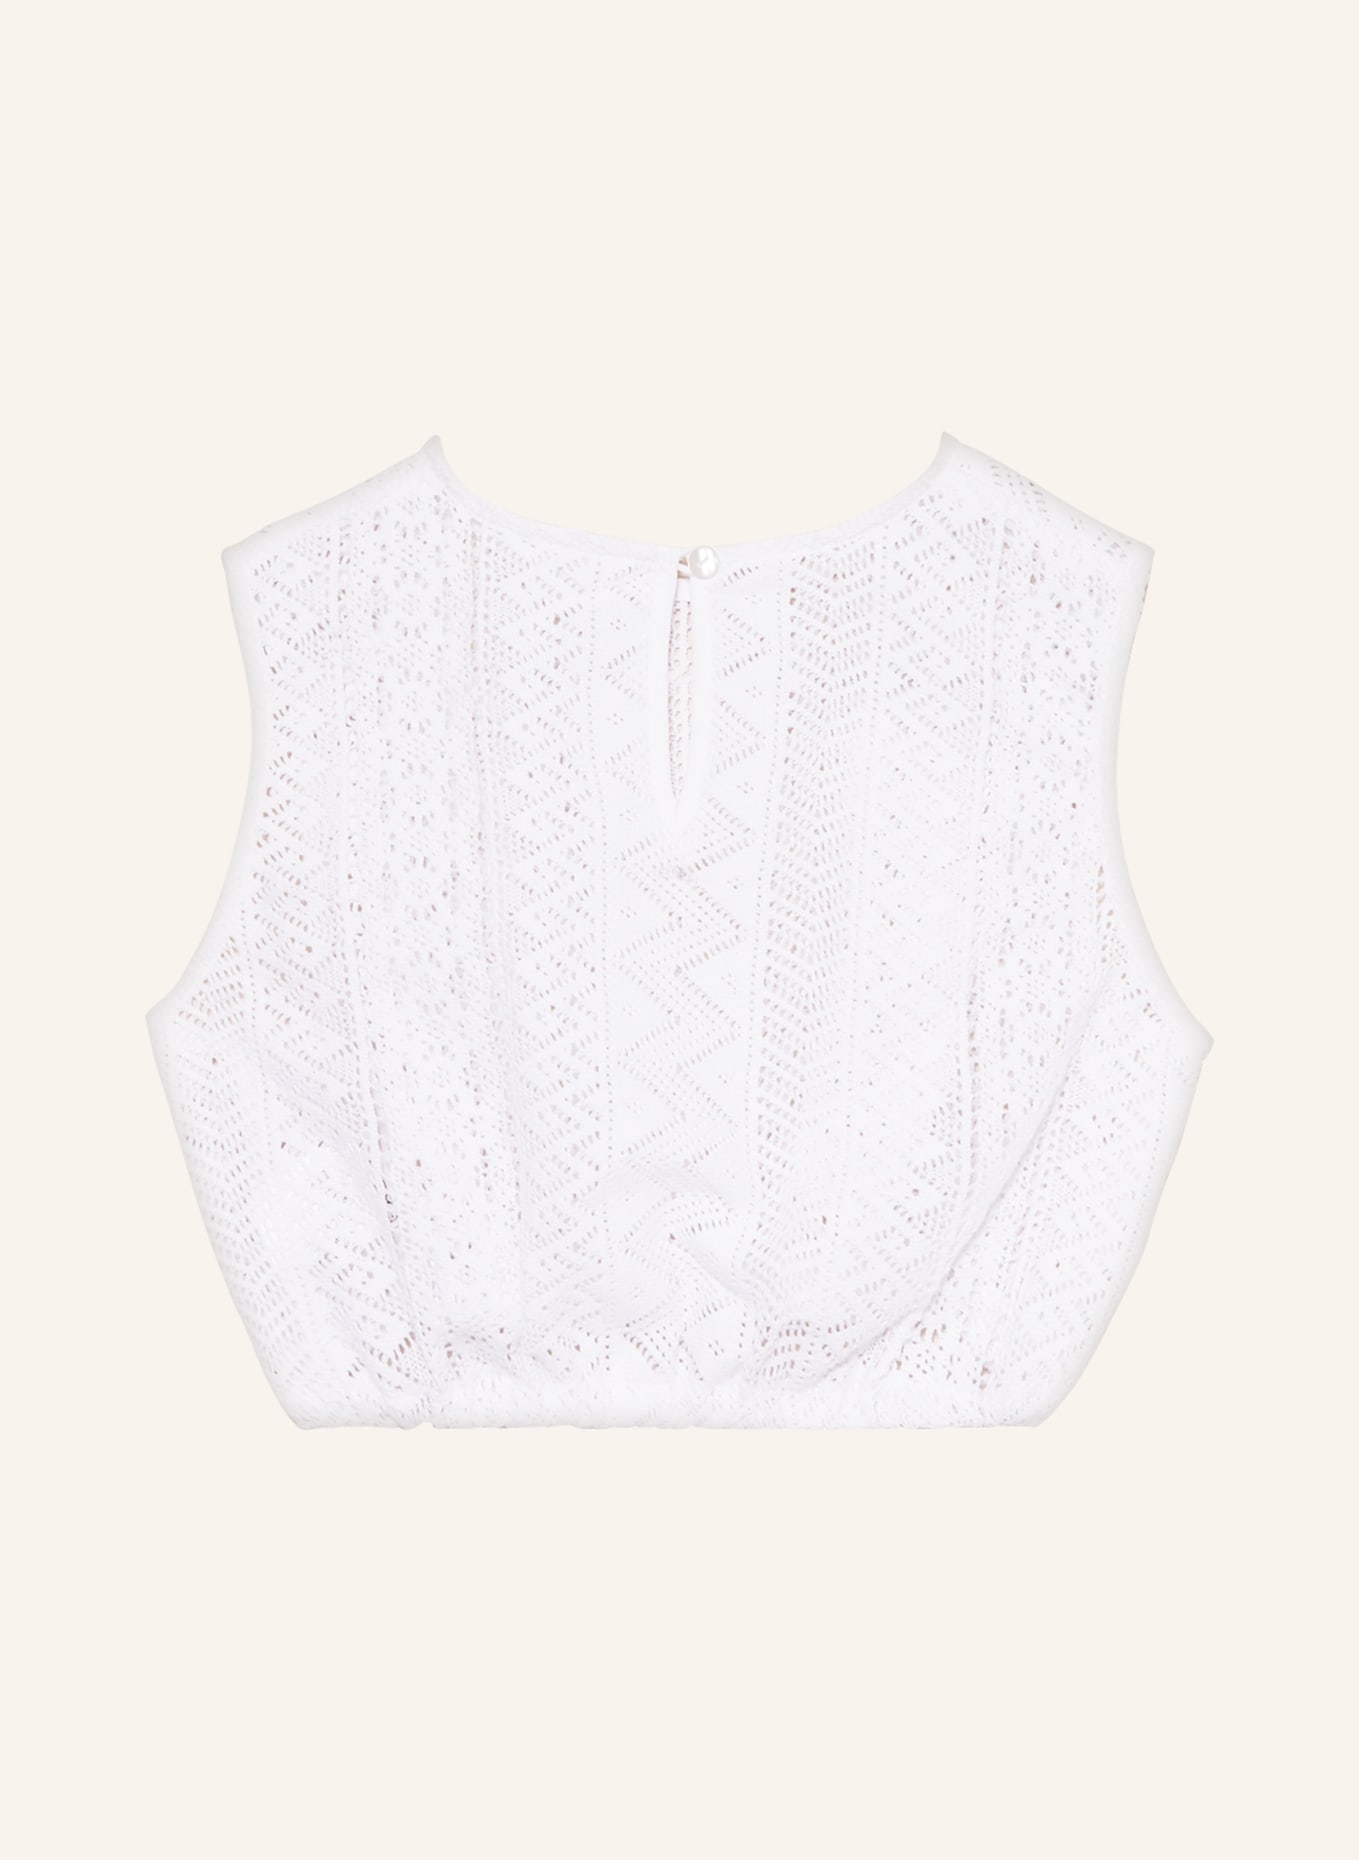 BERWIN & WOLFF Dirndl blouse made of lace, Color: WHITE (Image 2)